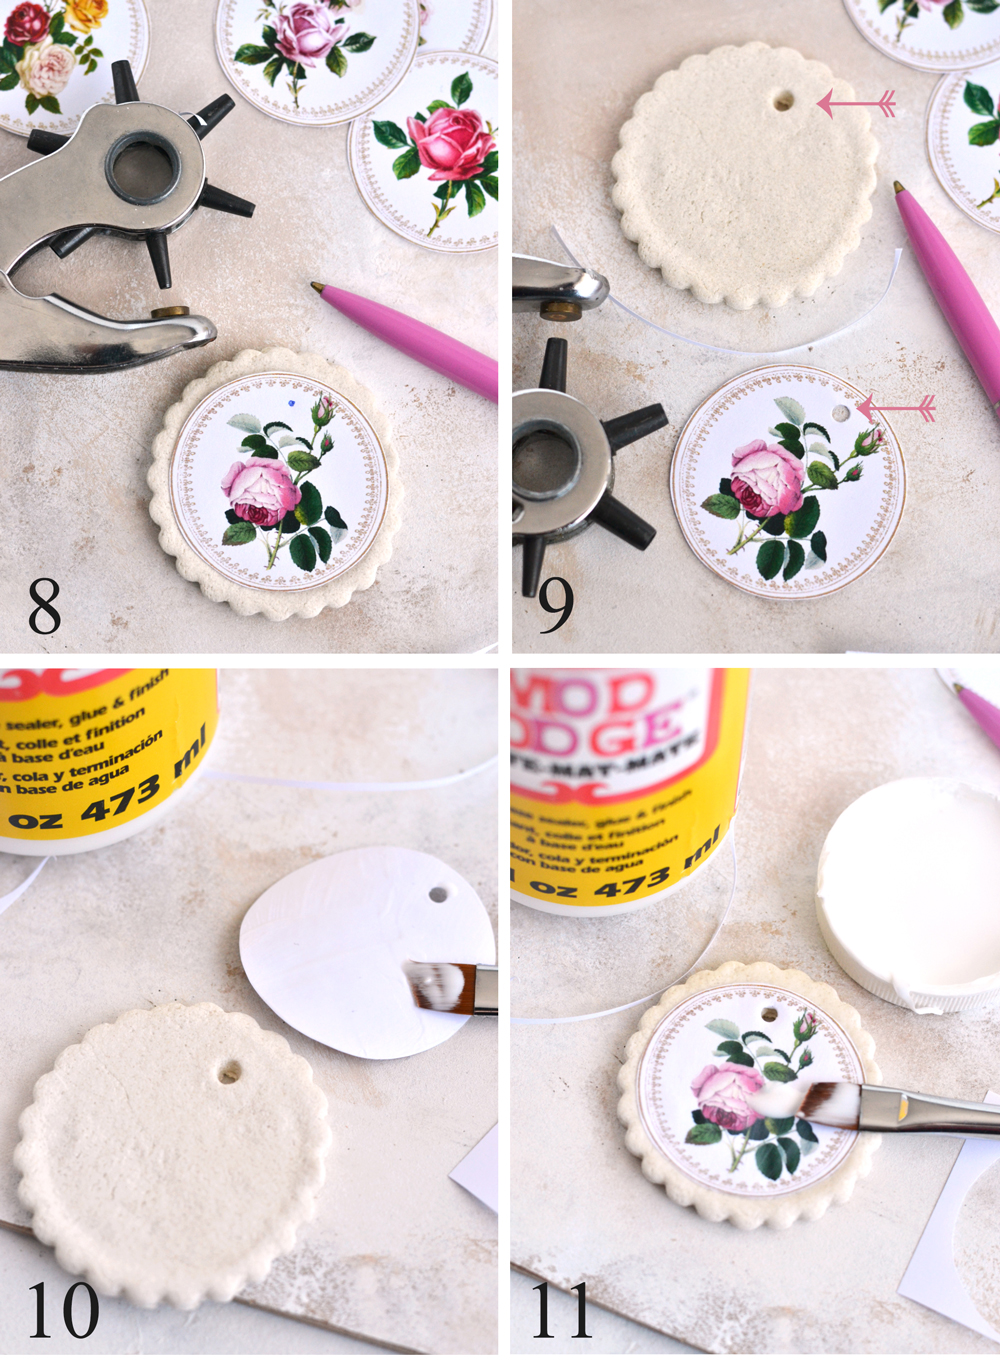 Gluing stickers to ornaments